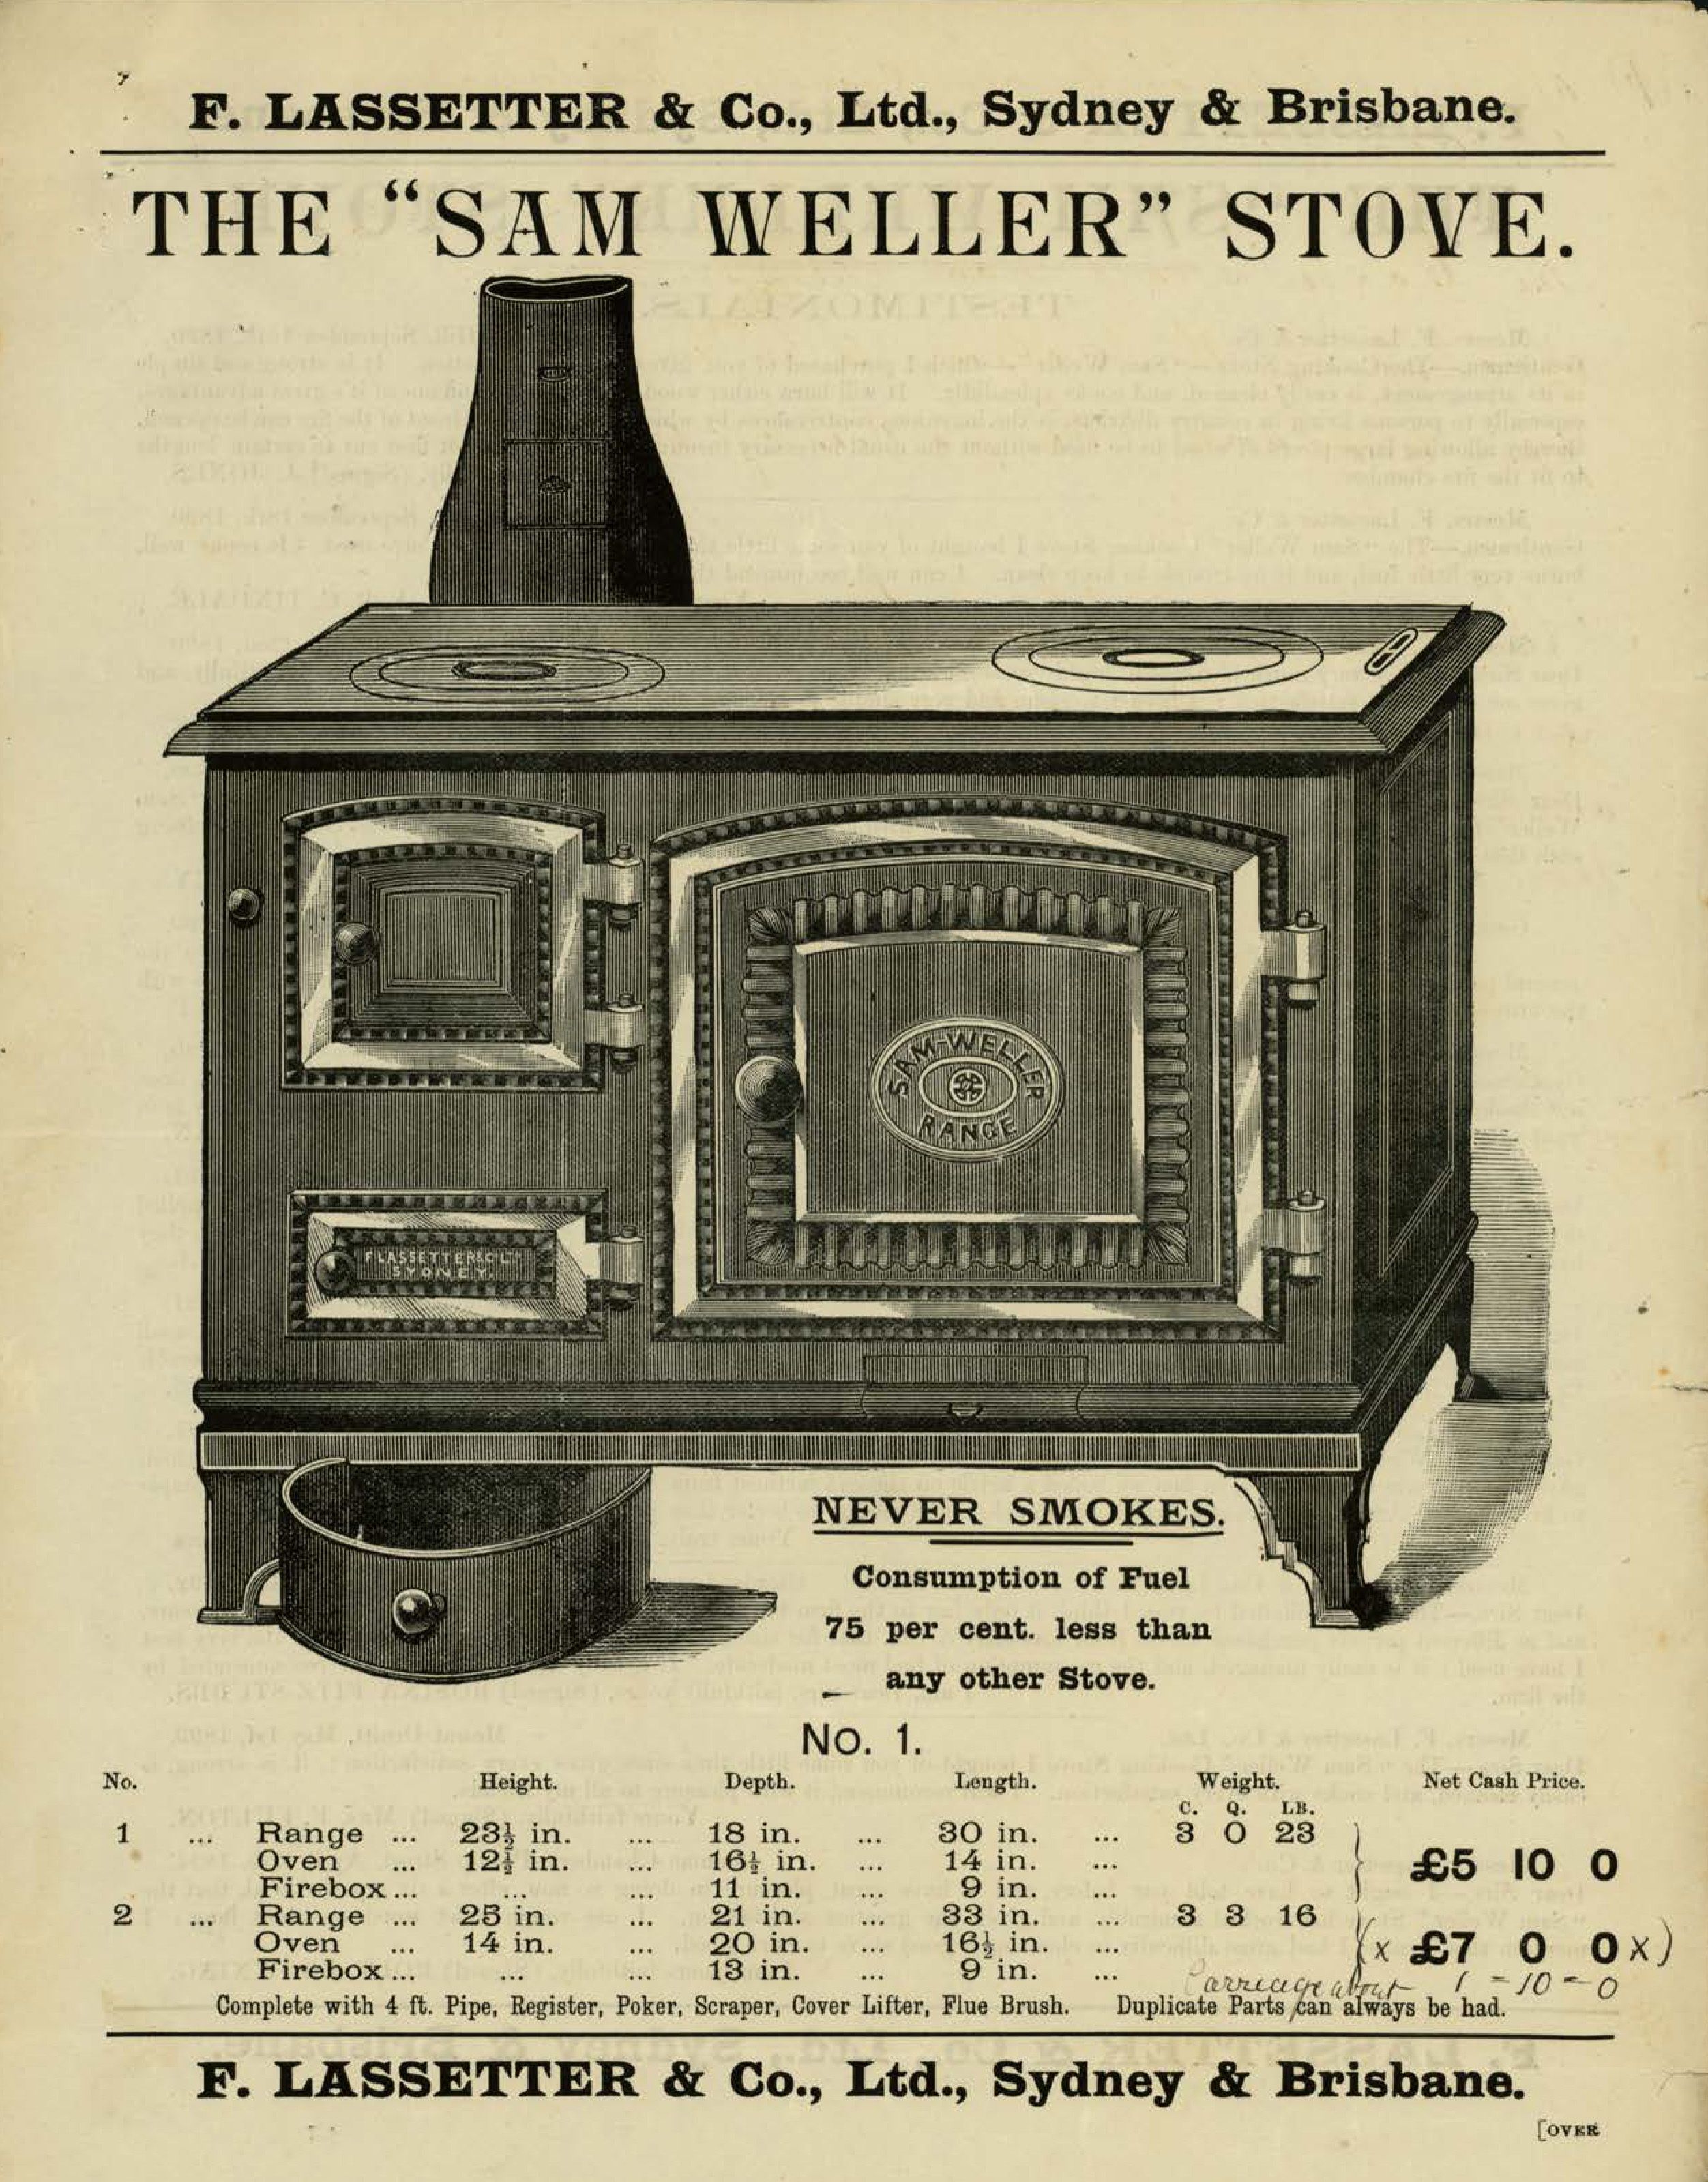 The ‘Sam Weller’ stove, illustrated in a catalogue, c1897. Black on an aged looking paper.